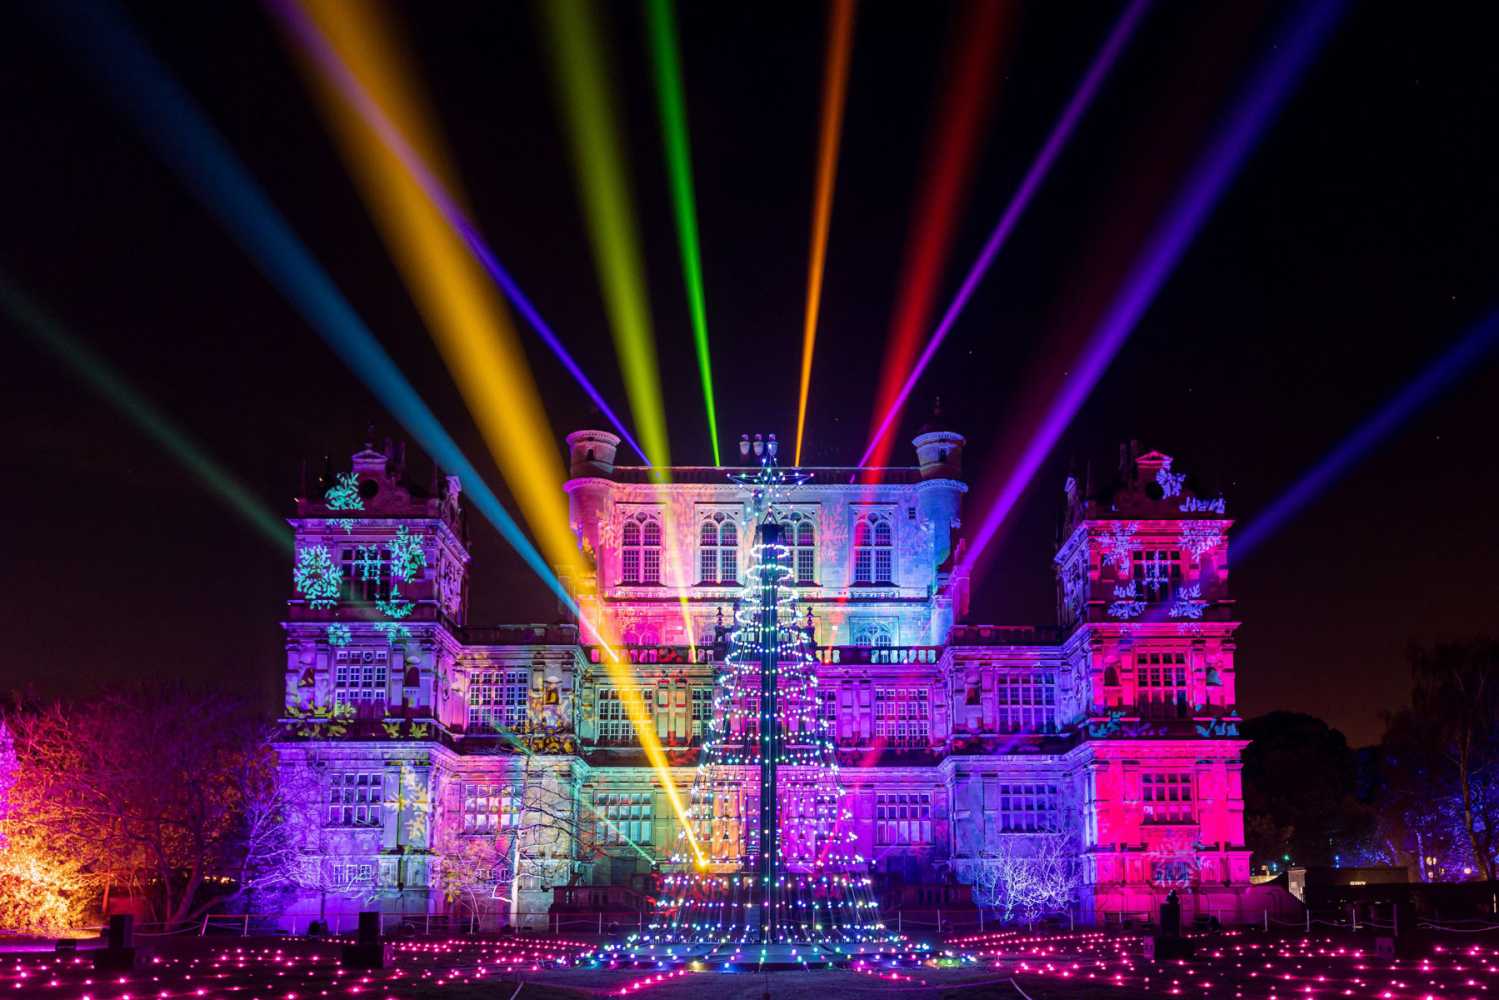 dnbAudile's spectacular finale to the illuminated Christmas walk at Wollaton Hall, with Vista by Chroma-Q in control throughout.